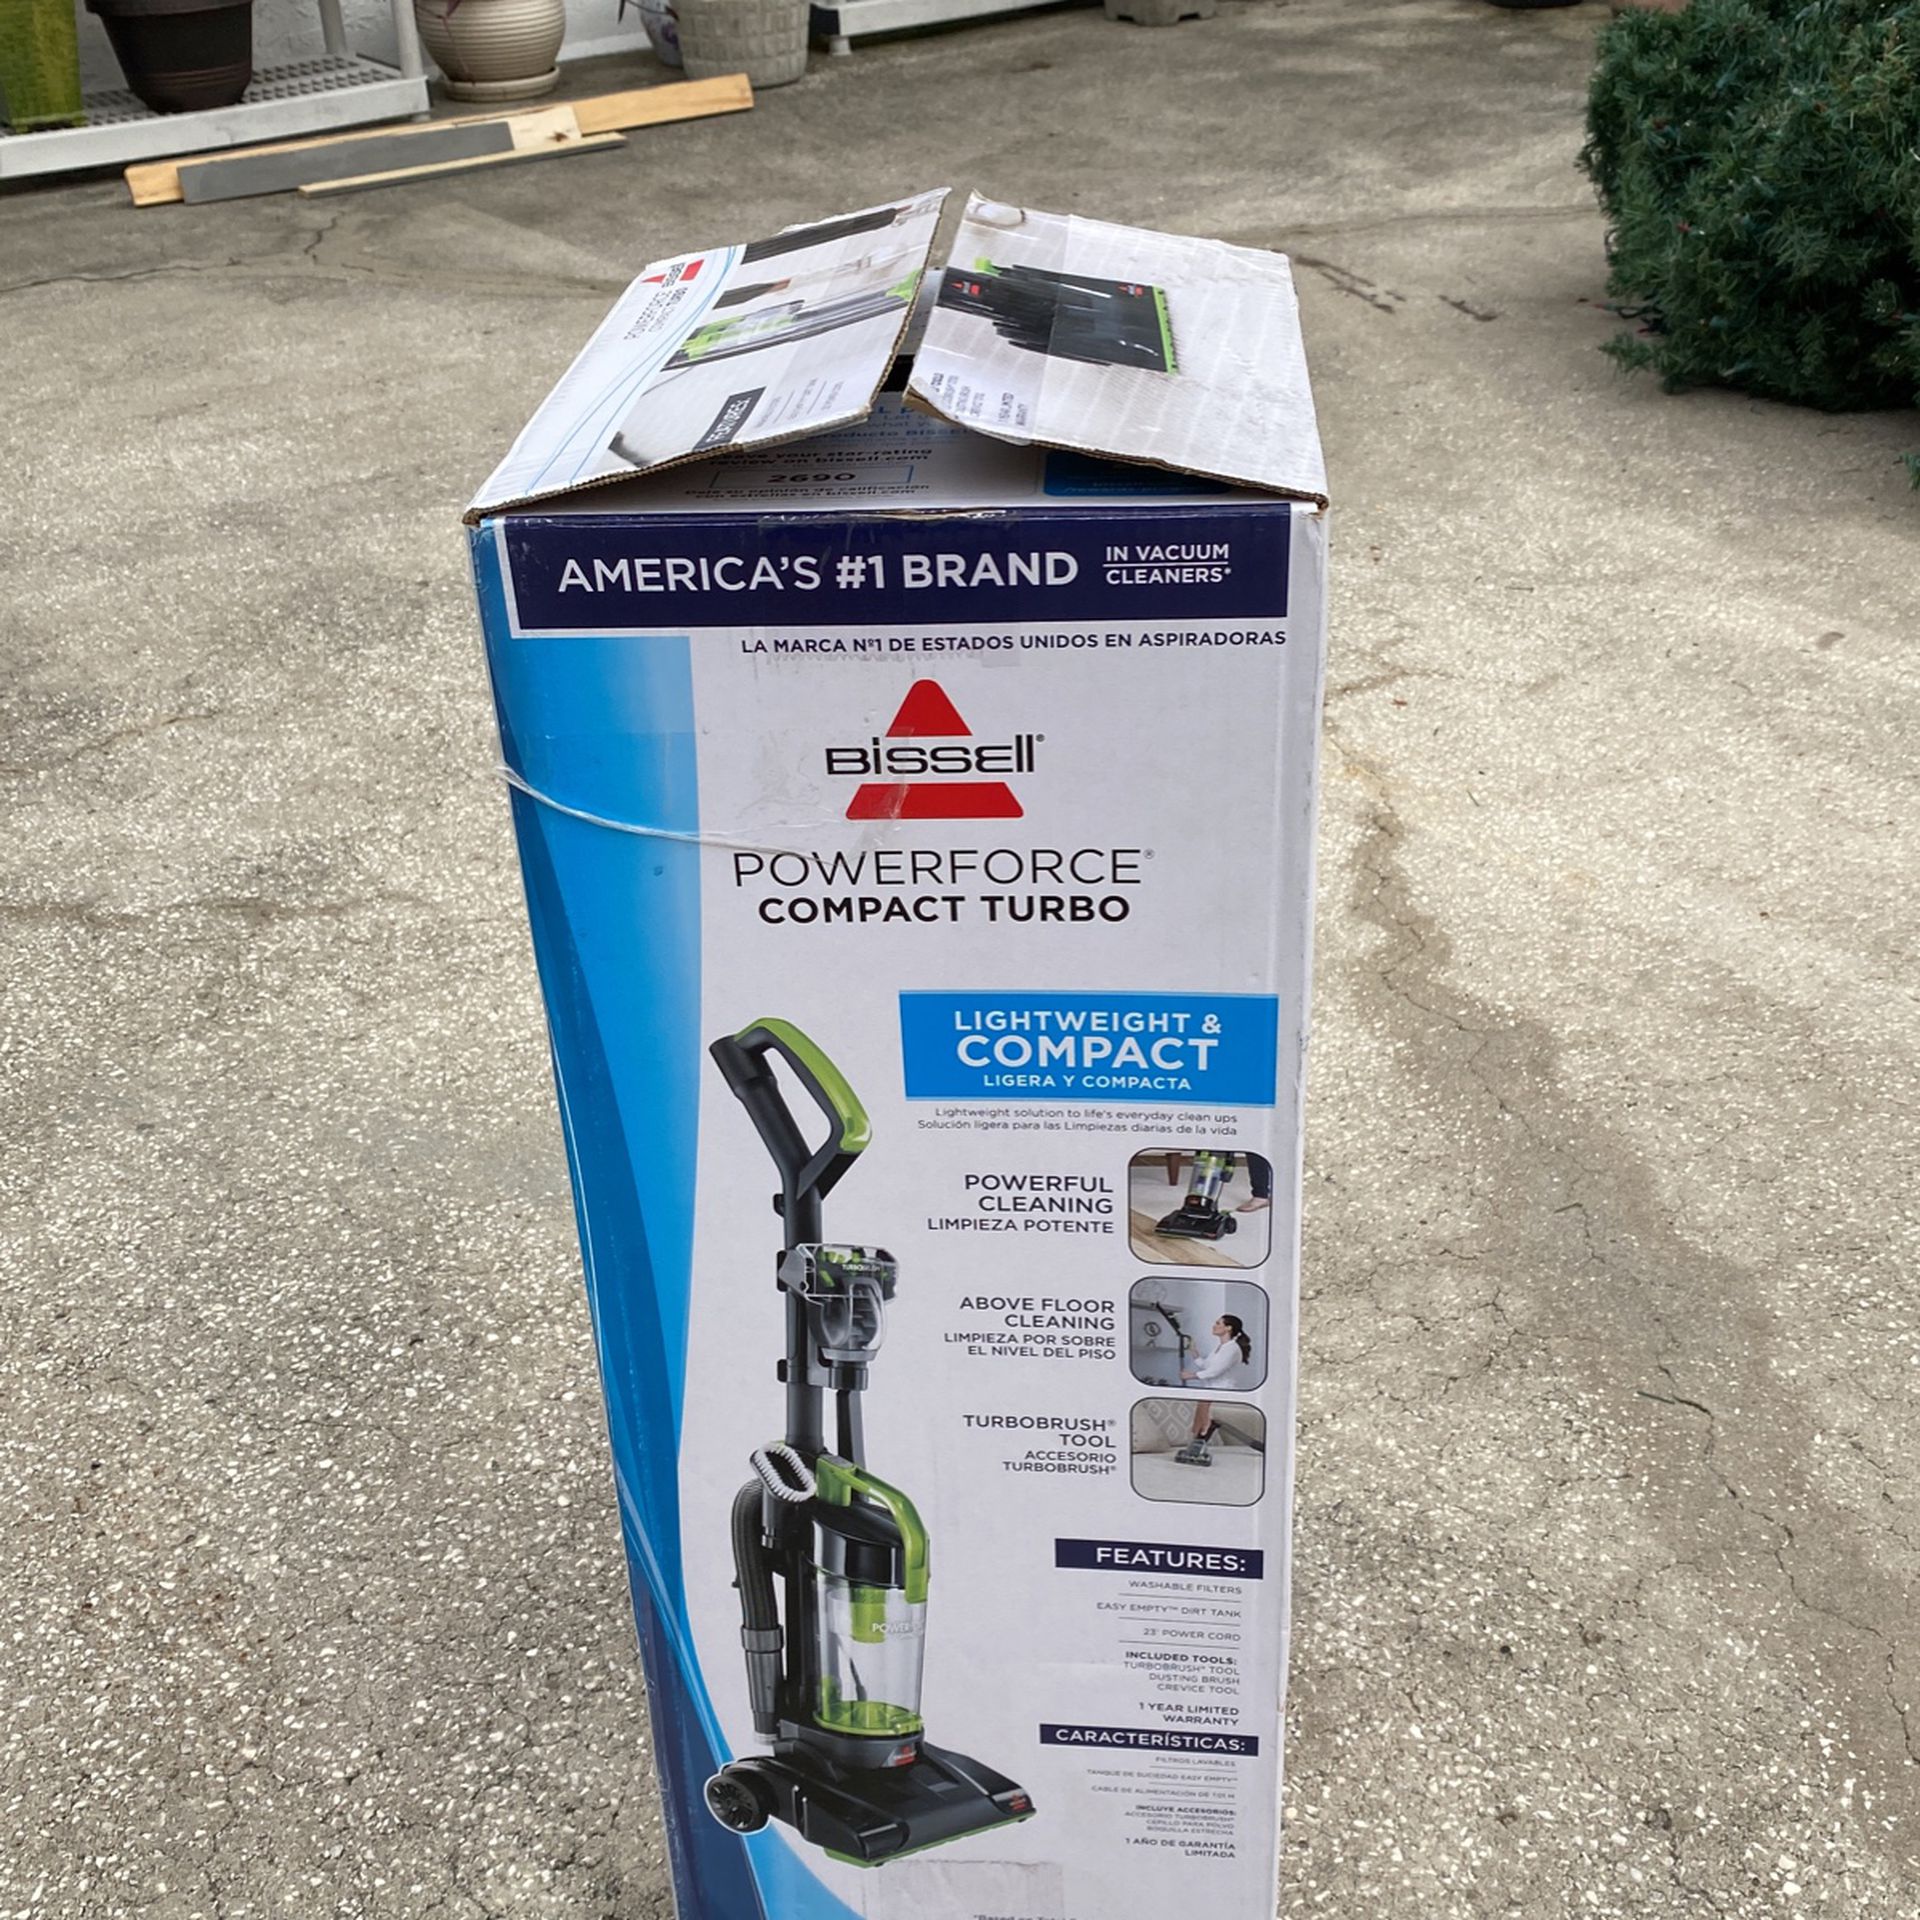 Brand New Bissel Lightweight Powerforce Compact Turbo Vacuum